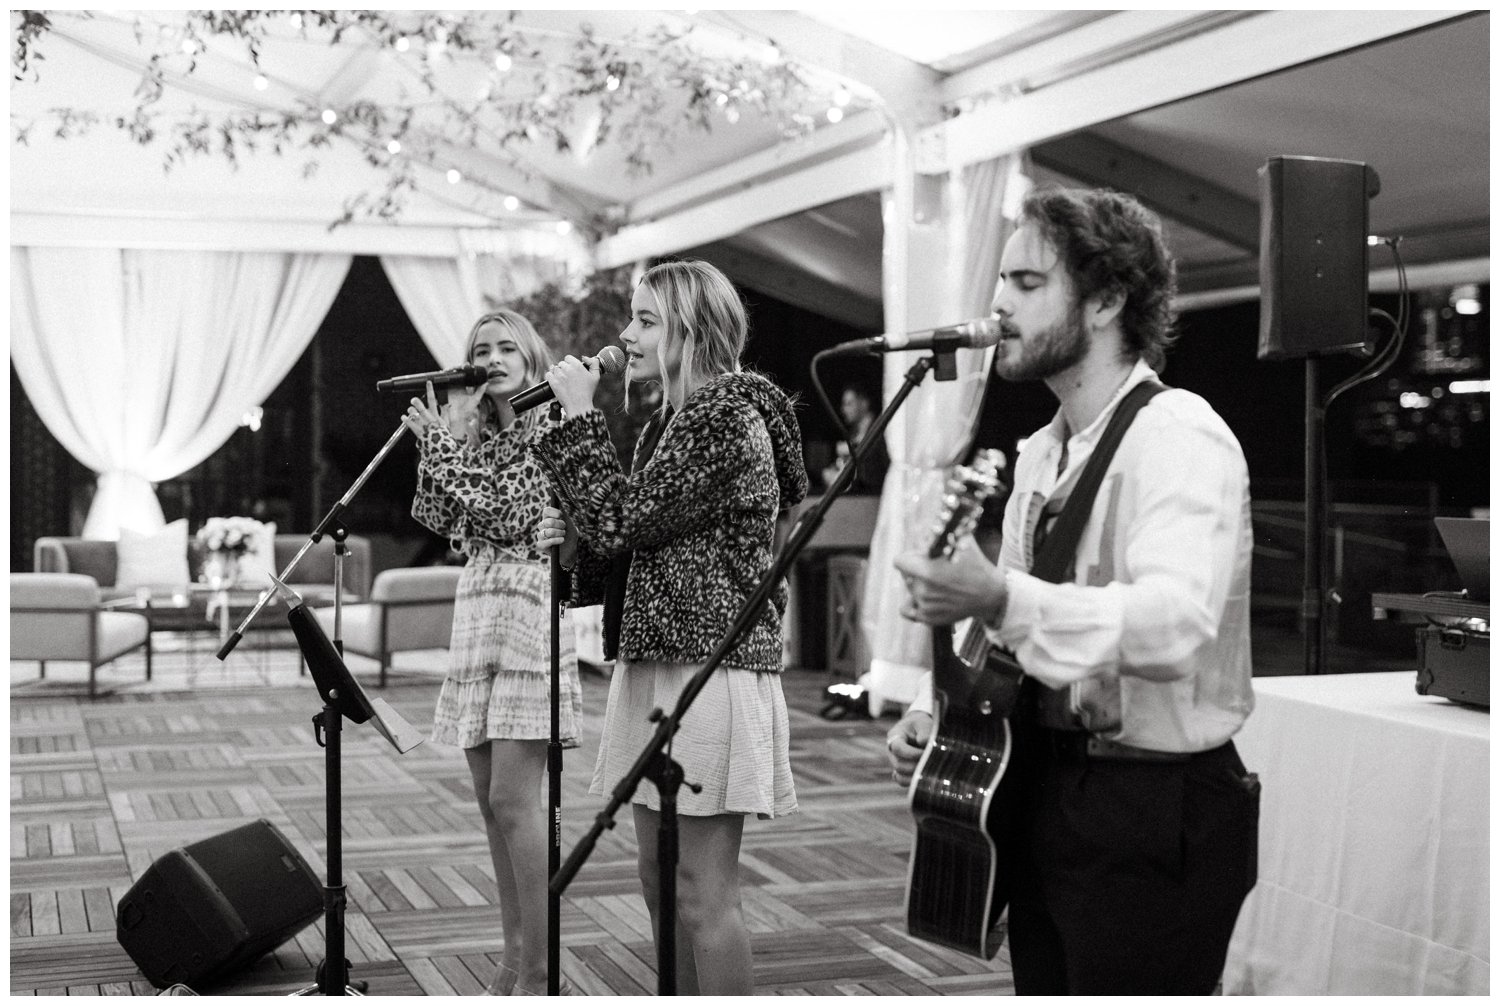 Black and white photo of band Temecula Road playing a small wedding reception